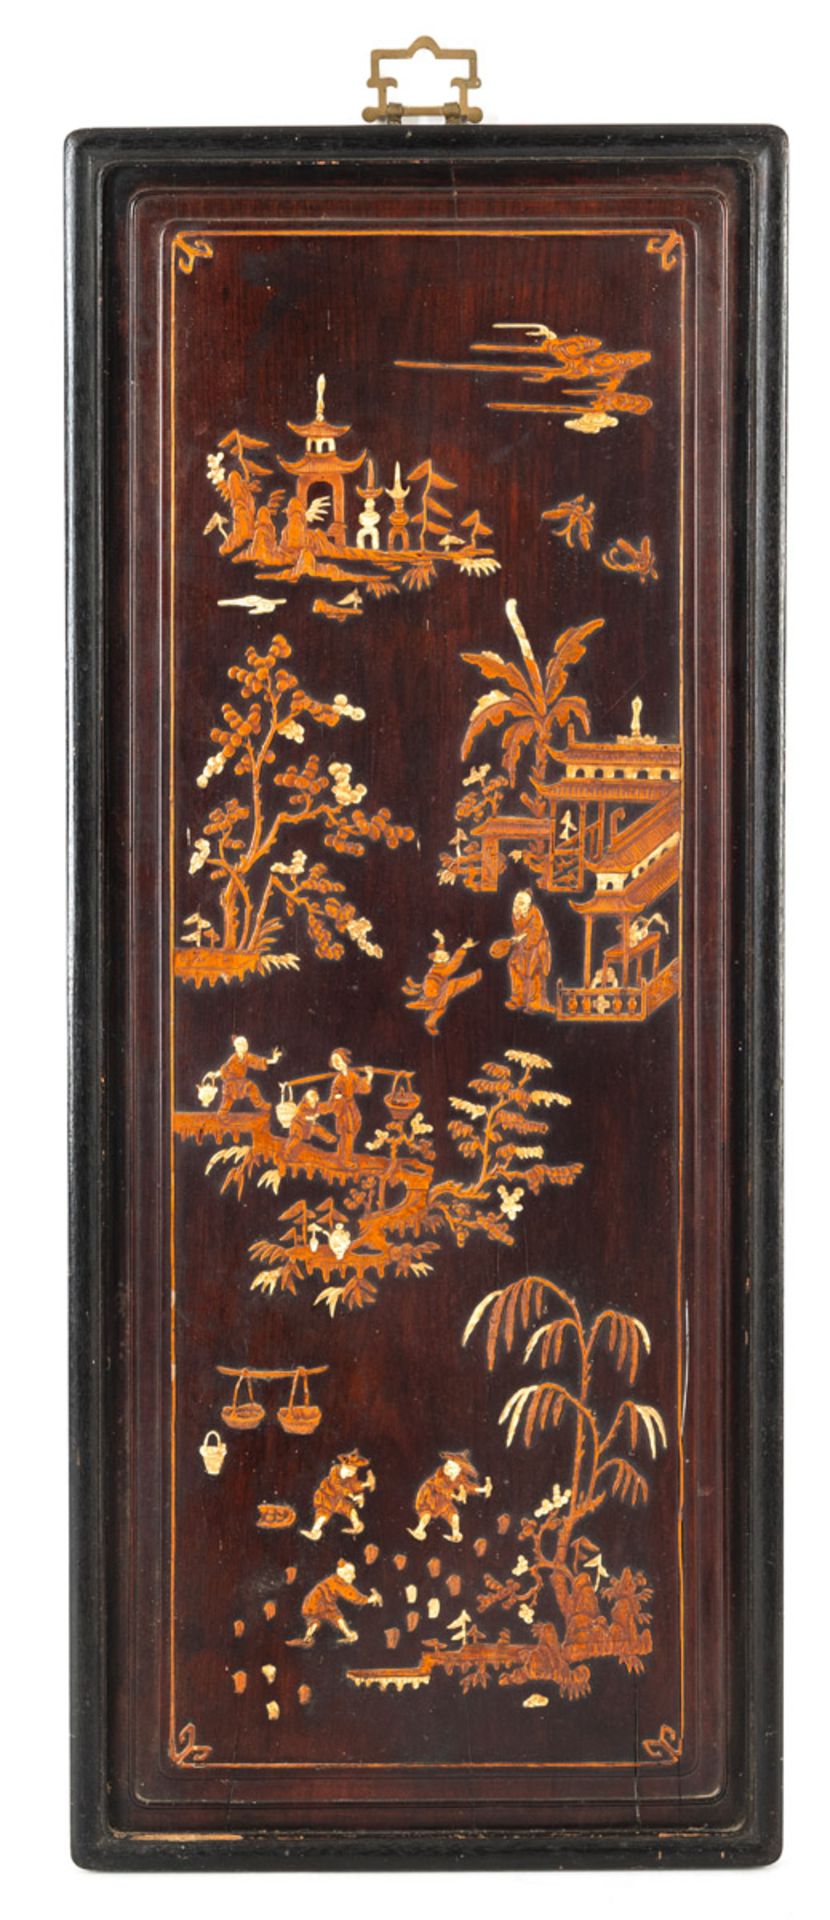 A WOOD PANEL WITH RELIEF BOXWOOD CARVING OF FIGURAL SCENES - Image 2 of 3